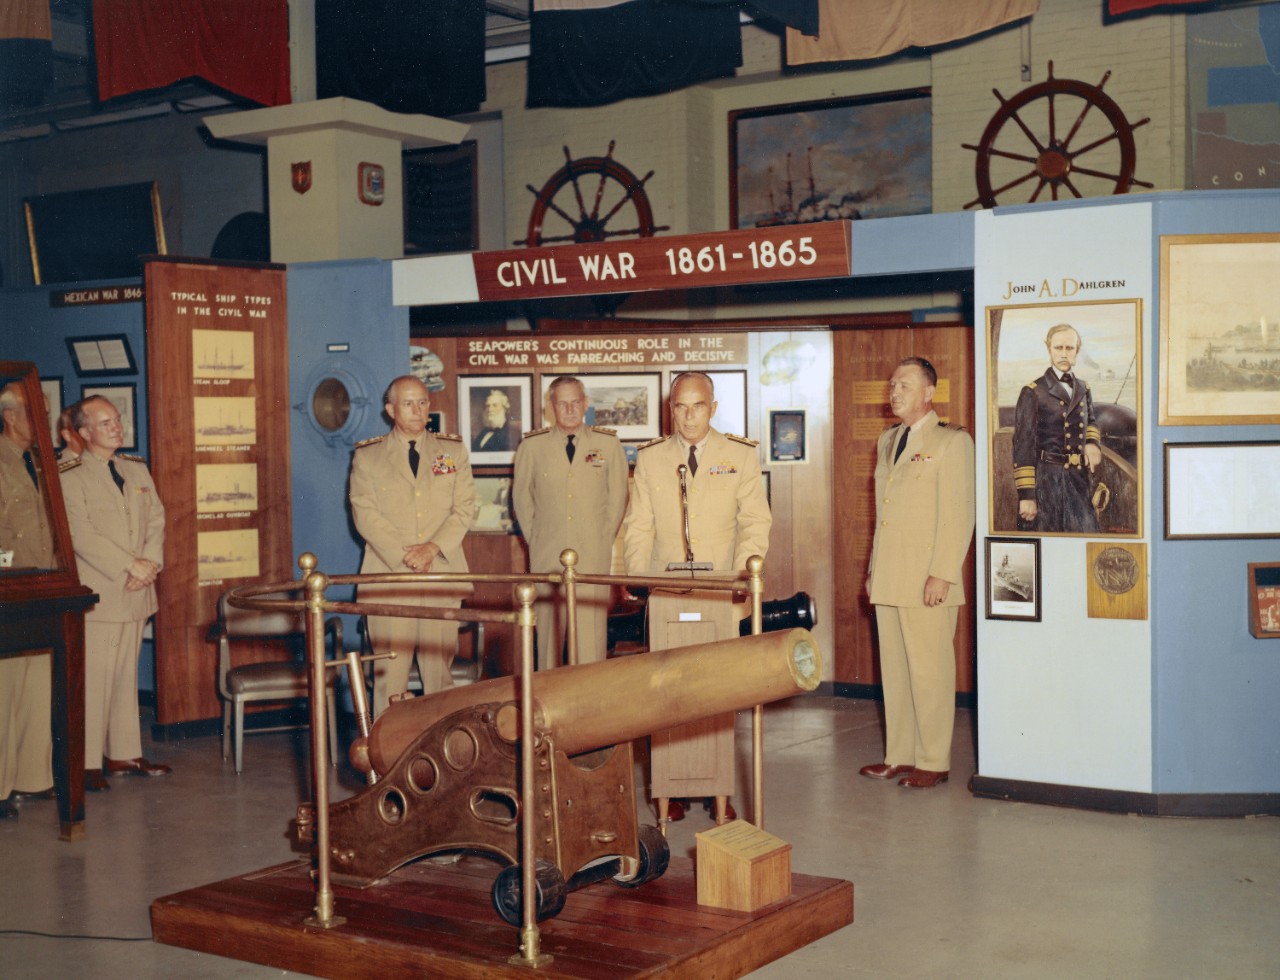 NMUSN-27:    Presentation of 20-Pounder Dahlgren Gun, Navy Memorial Museum, July 1968.    Admiral Willard J. Smith, Commandant, U.S. Coast Guard presents the gun in a formal ceremony.   Others in attendance.   Shown, left to right:   Rear Admiral Ernest M. Eller (blocked by exhibit case); Rear Admiral R.W. Goehring; Admiral Thomas H. Moorer, Chief of Naval Operations; Rear Admiral Elliott Loughlin; Admiral Willard J. Smith, Commandant, U.S. Coast Guard (speaking); and Captain Roy C. Smith, Director, Navy Memorial Museum.    This artifact is now on display by the frigate, USS Constitution, Fighting Top Area.    National Museum of the U.S. Navy Photograph Collection.   